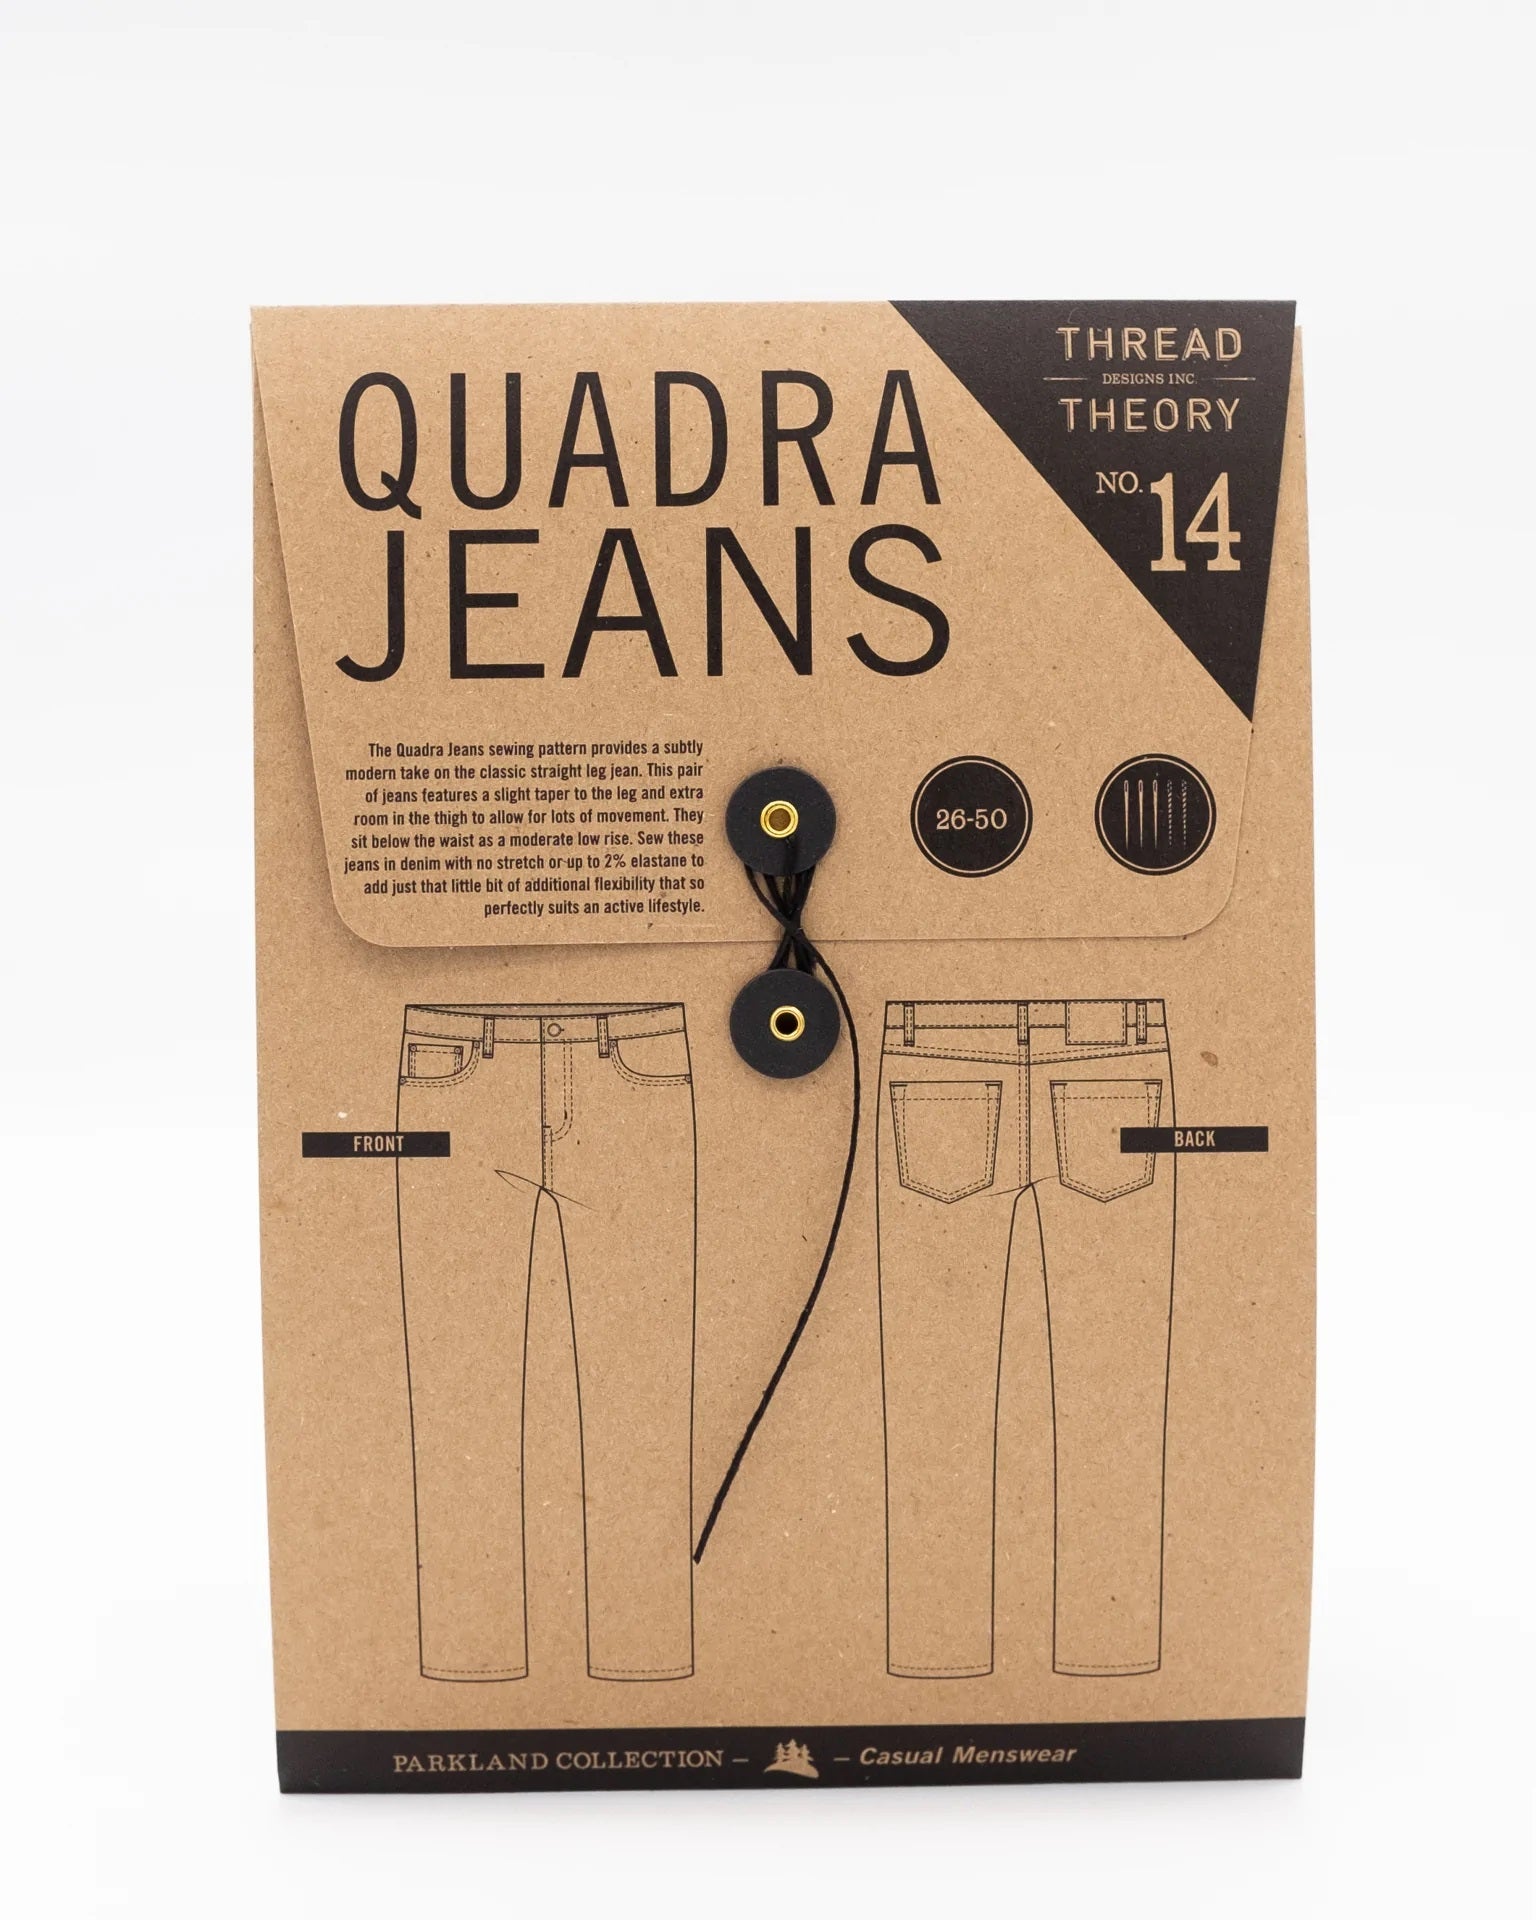 Quadra Jeans Pattern by Thread Theory